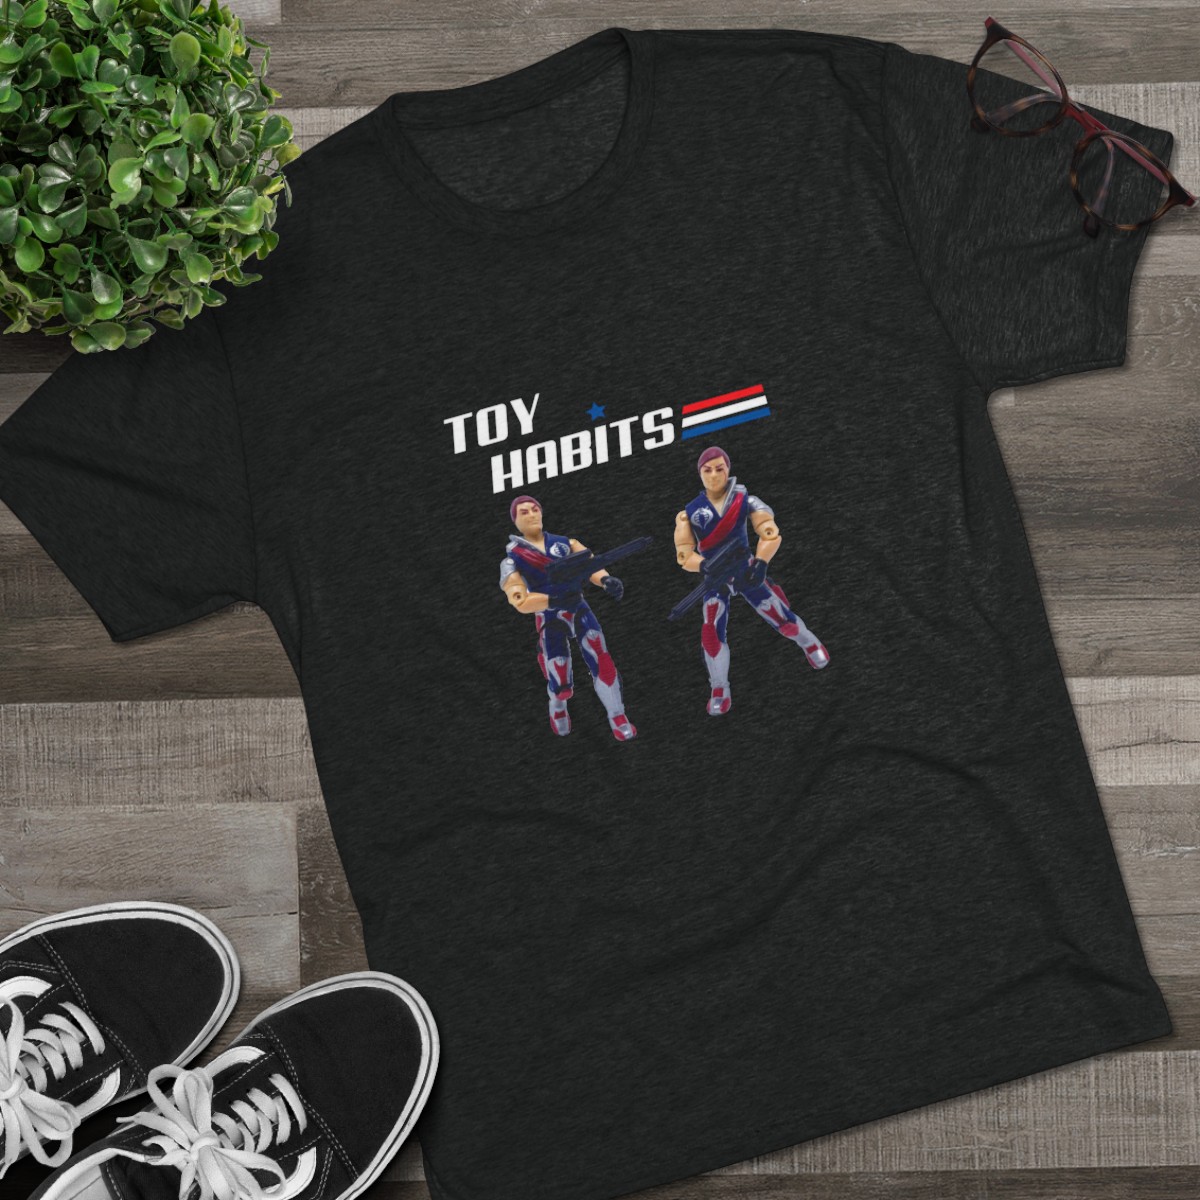 Tomax and Xamot Unisex Tri-Blend Crew Tee product thumbnail image